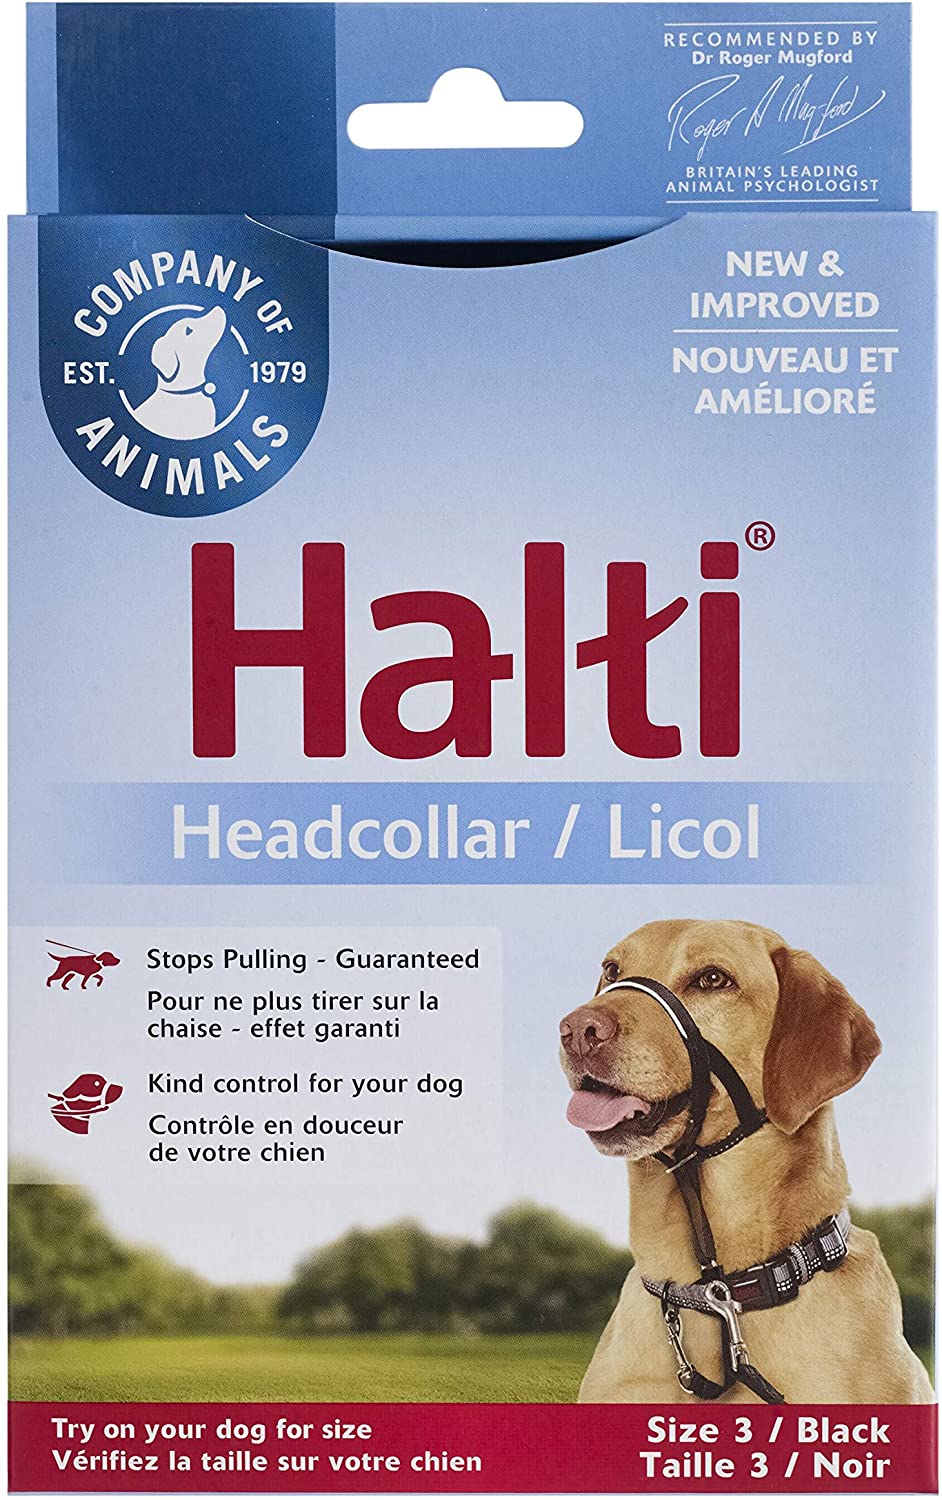 STOP PULLING - Train your dog to stop pulling on walks with the world-famous HALTI Headcollar. Neoprene-padded noseband ensures supreme comfort for your dog and prevents the strip from moving into your dog’s eyes PRACTICAL & SAFE - The safety loop attaches to the d-ring on the dog’s collar allowing control even if the headcollar comes off. 